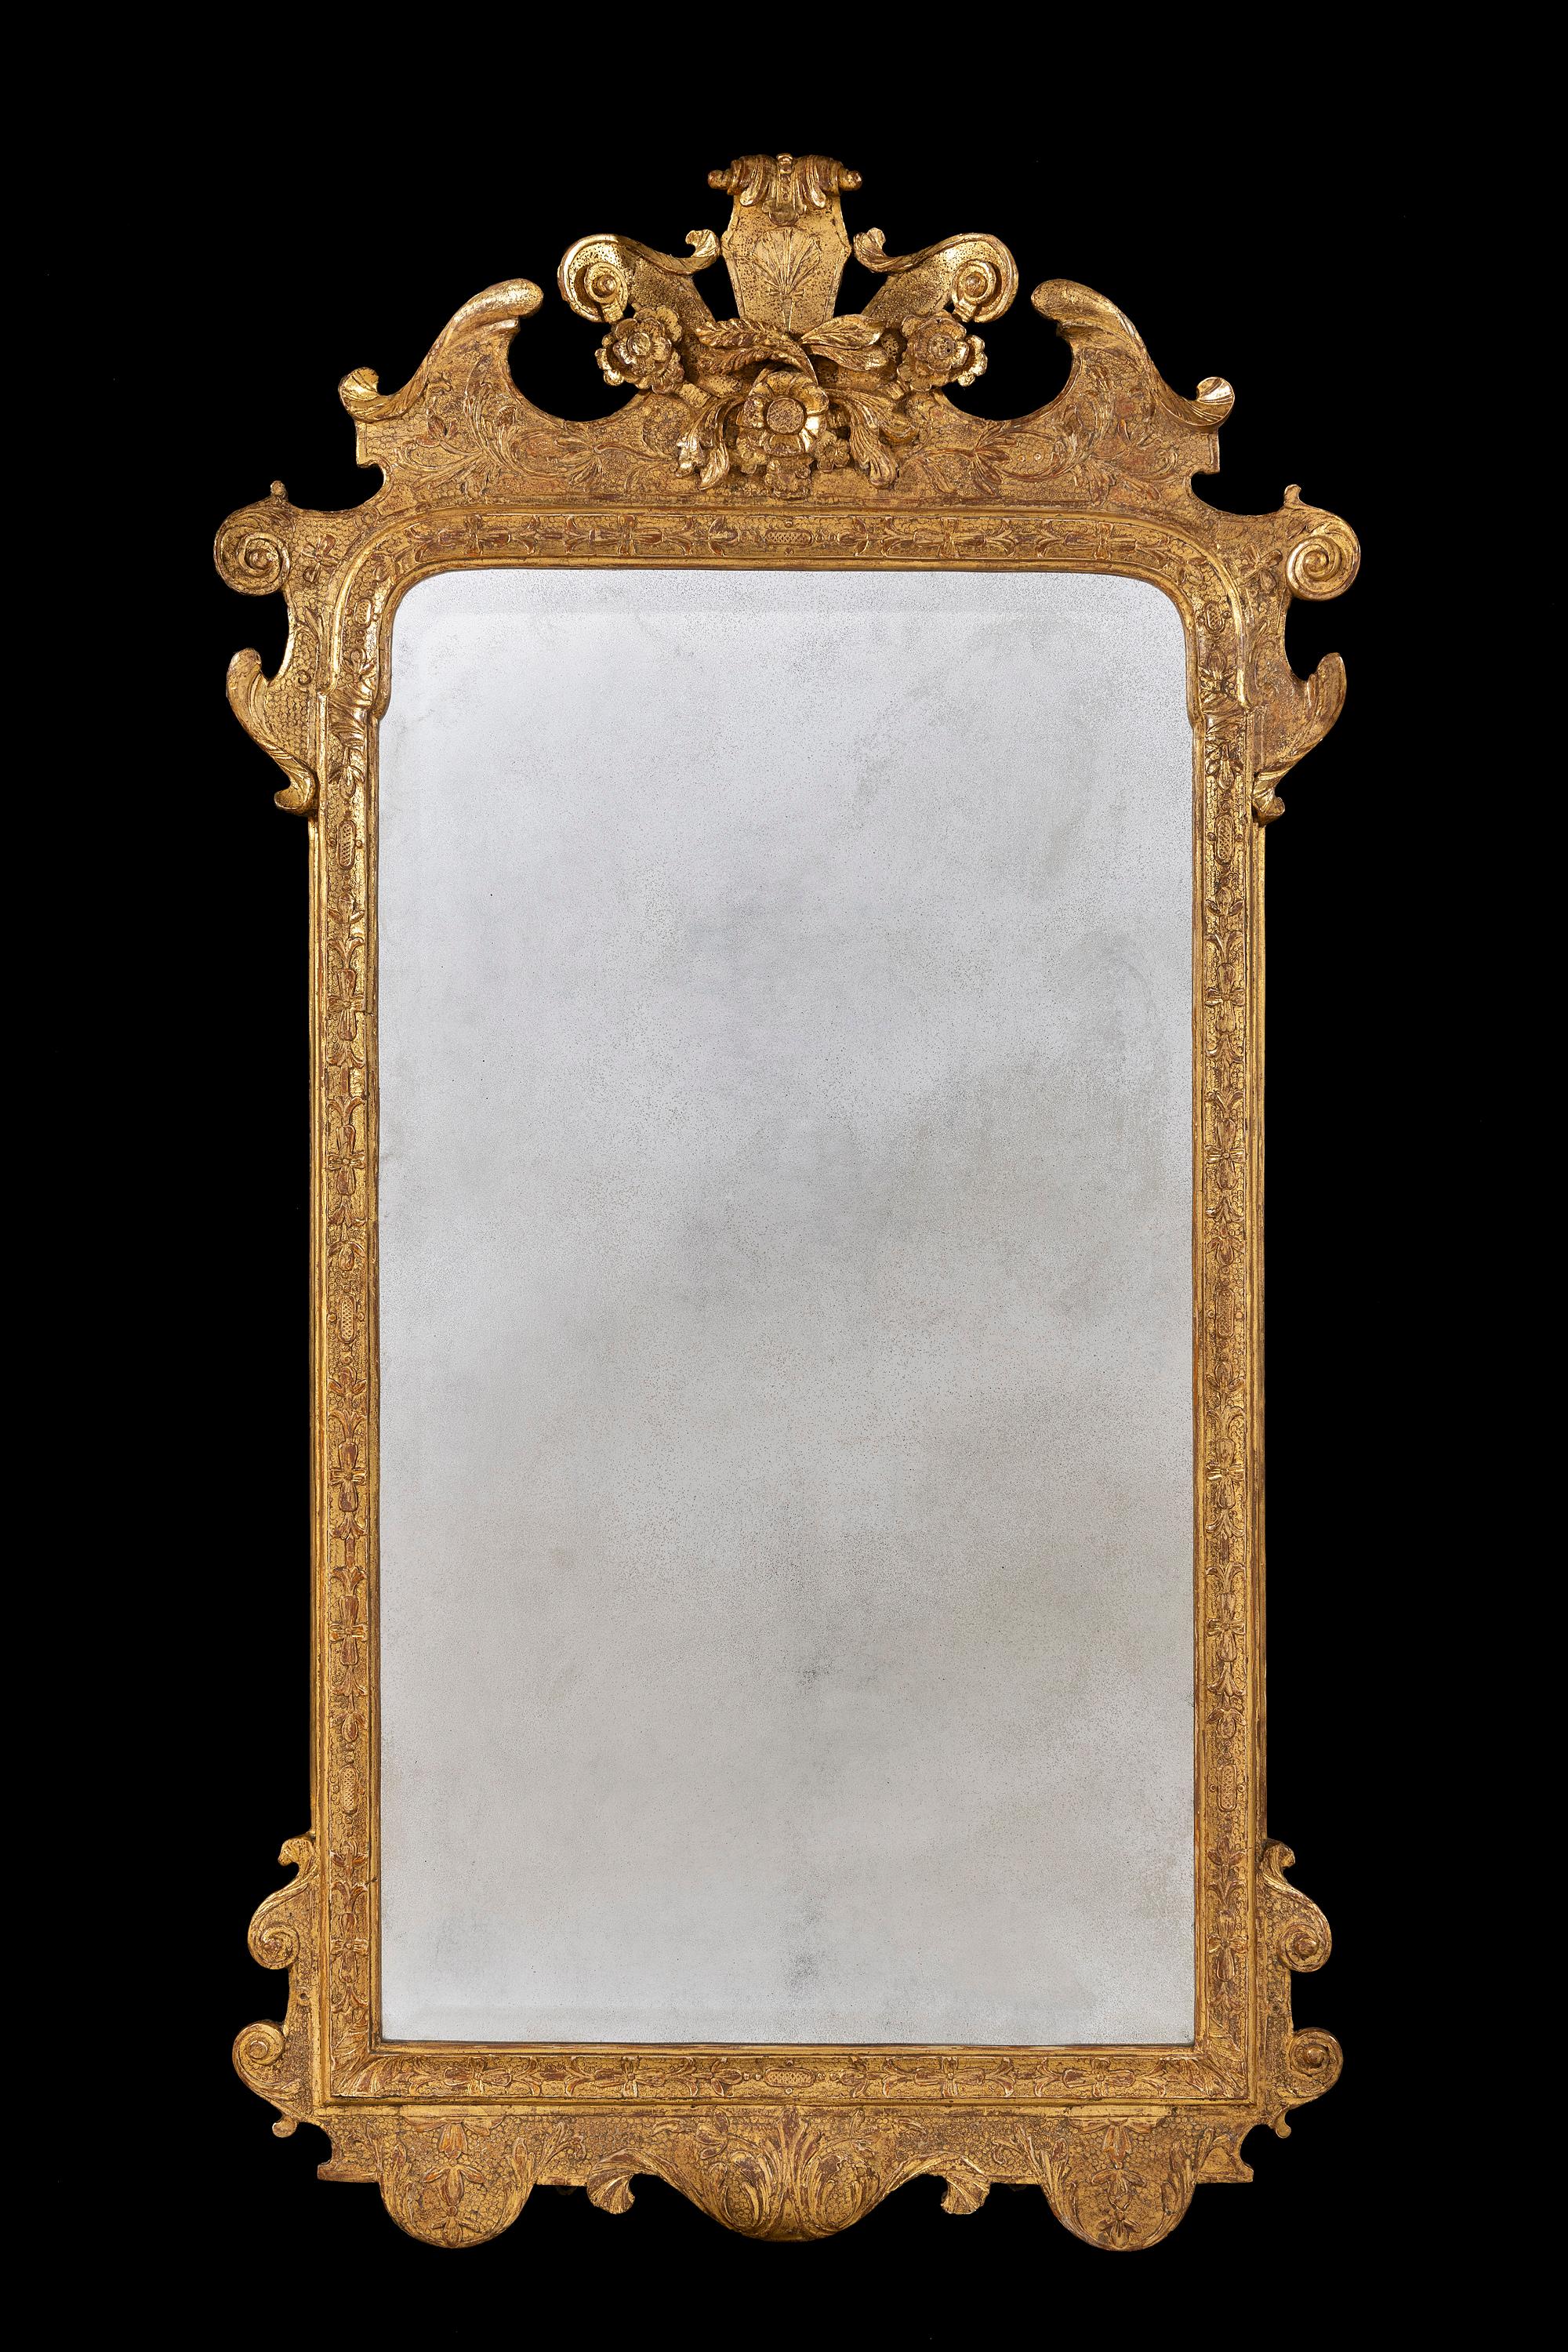 Early George I Period 18th Century Carved Gesso Mirror In Good Condition For Sale In Bradford on Avon, GB